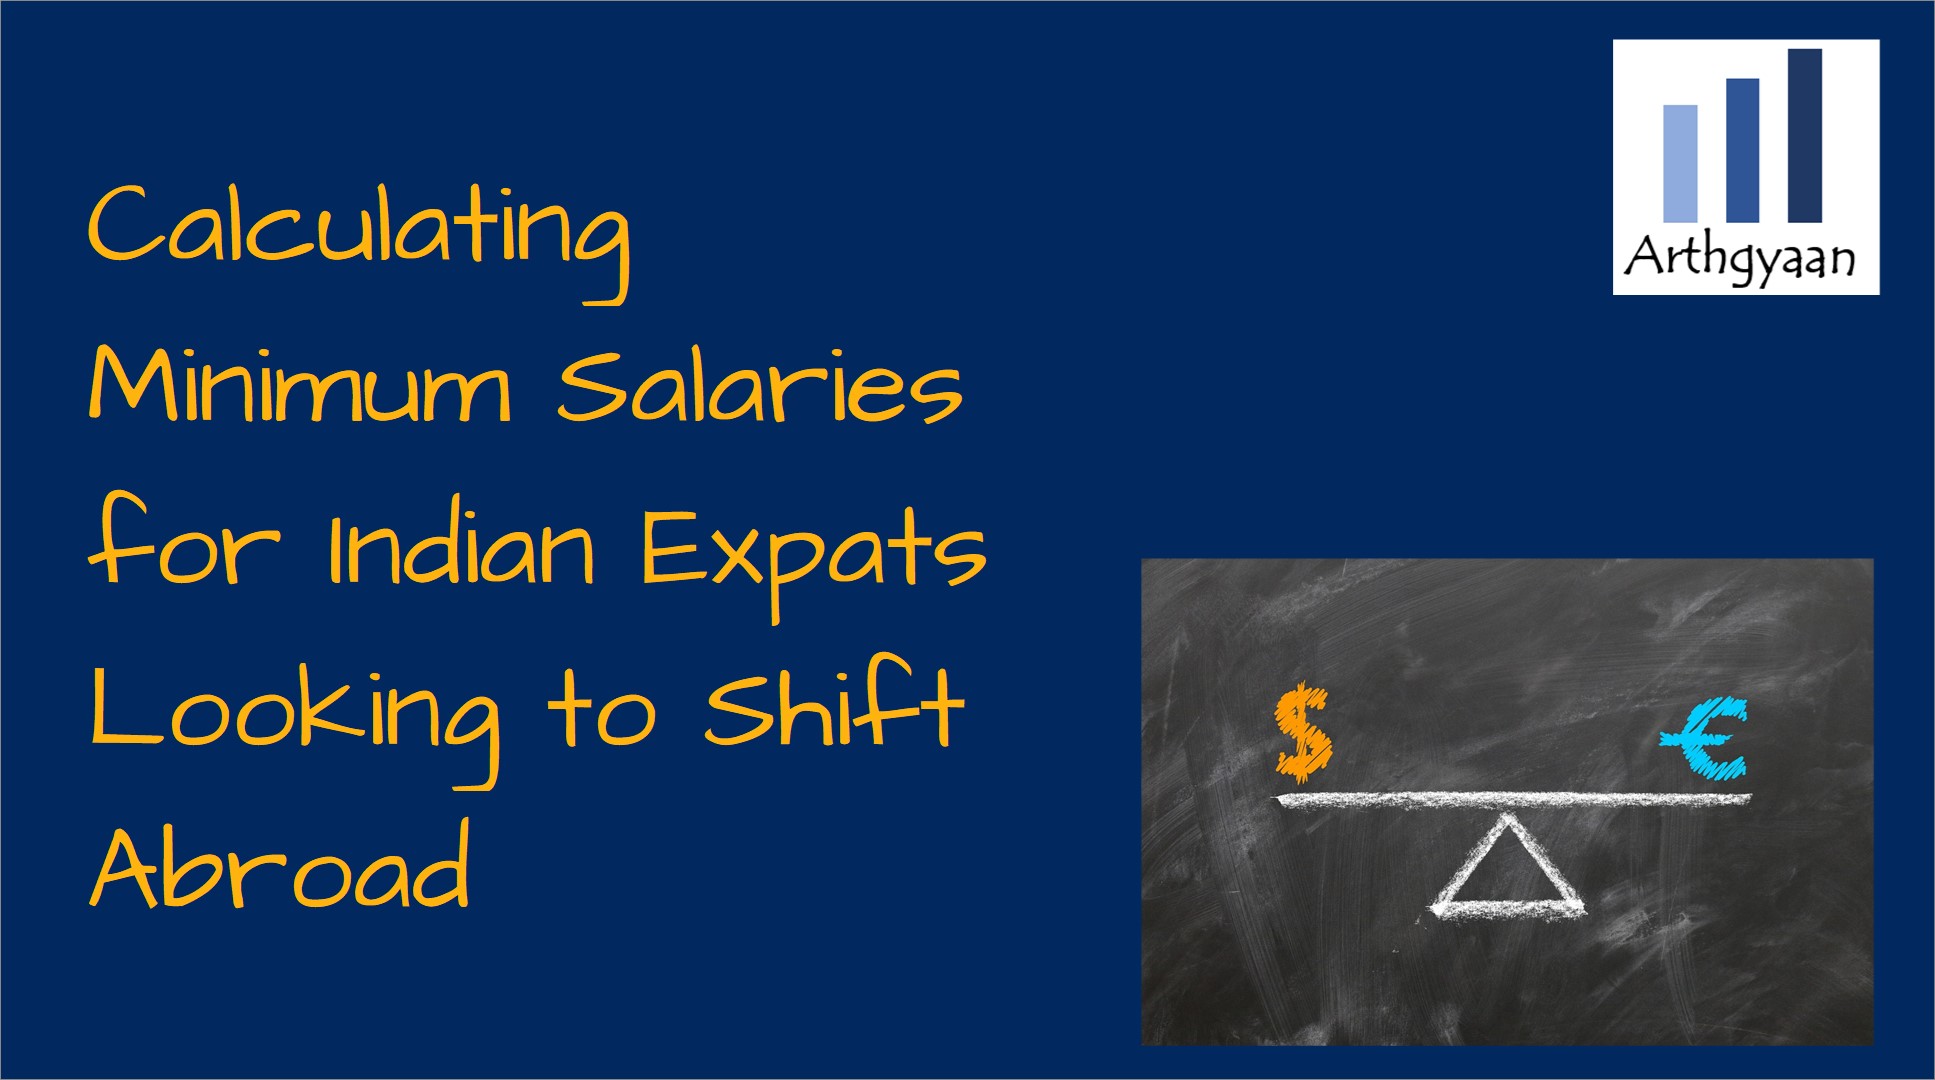 Calculating Minimum Salaries for Indian Expats Looking to Shift Abroad